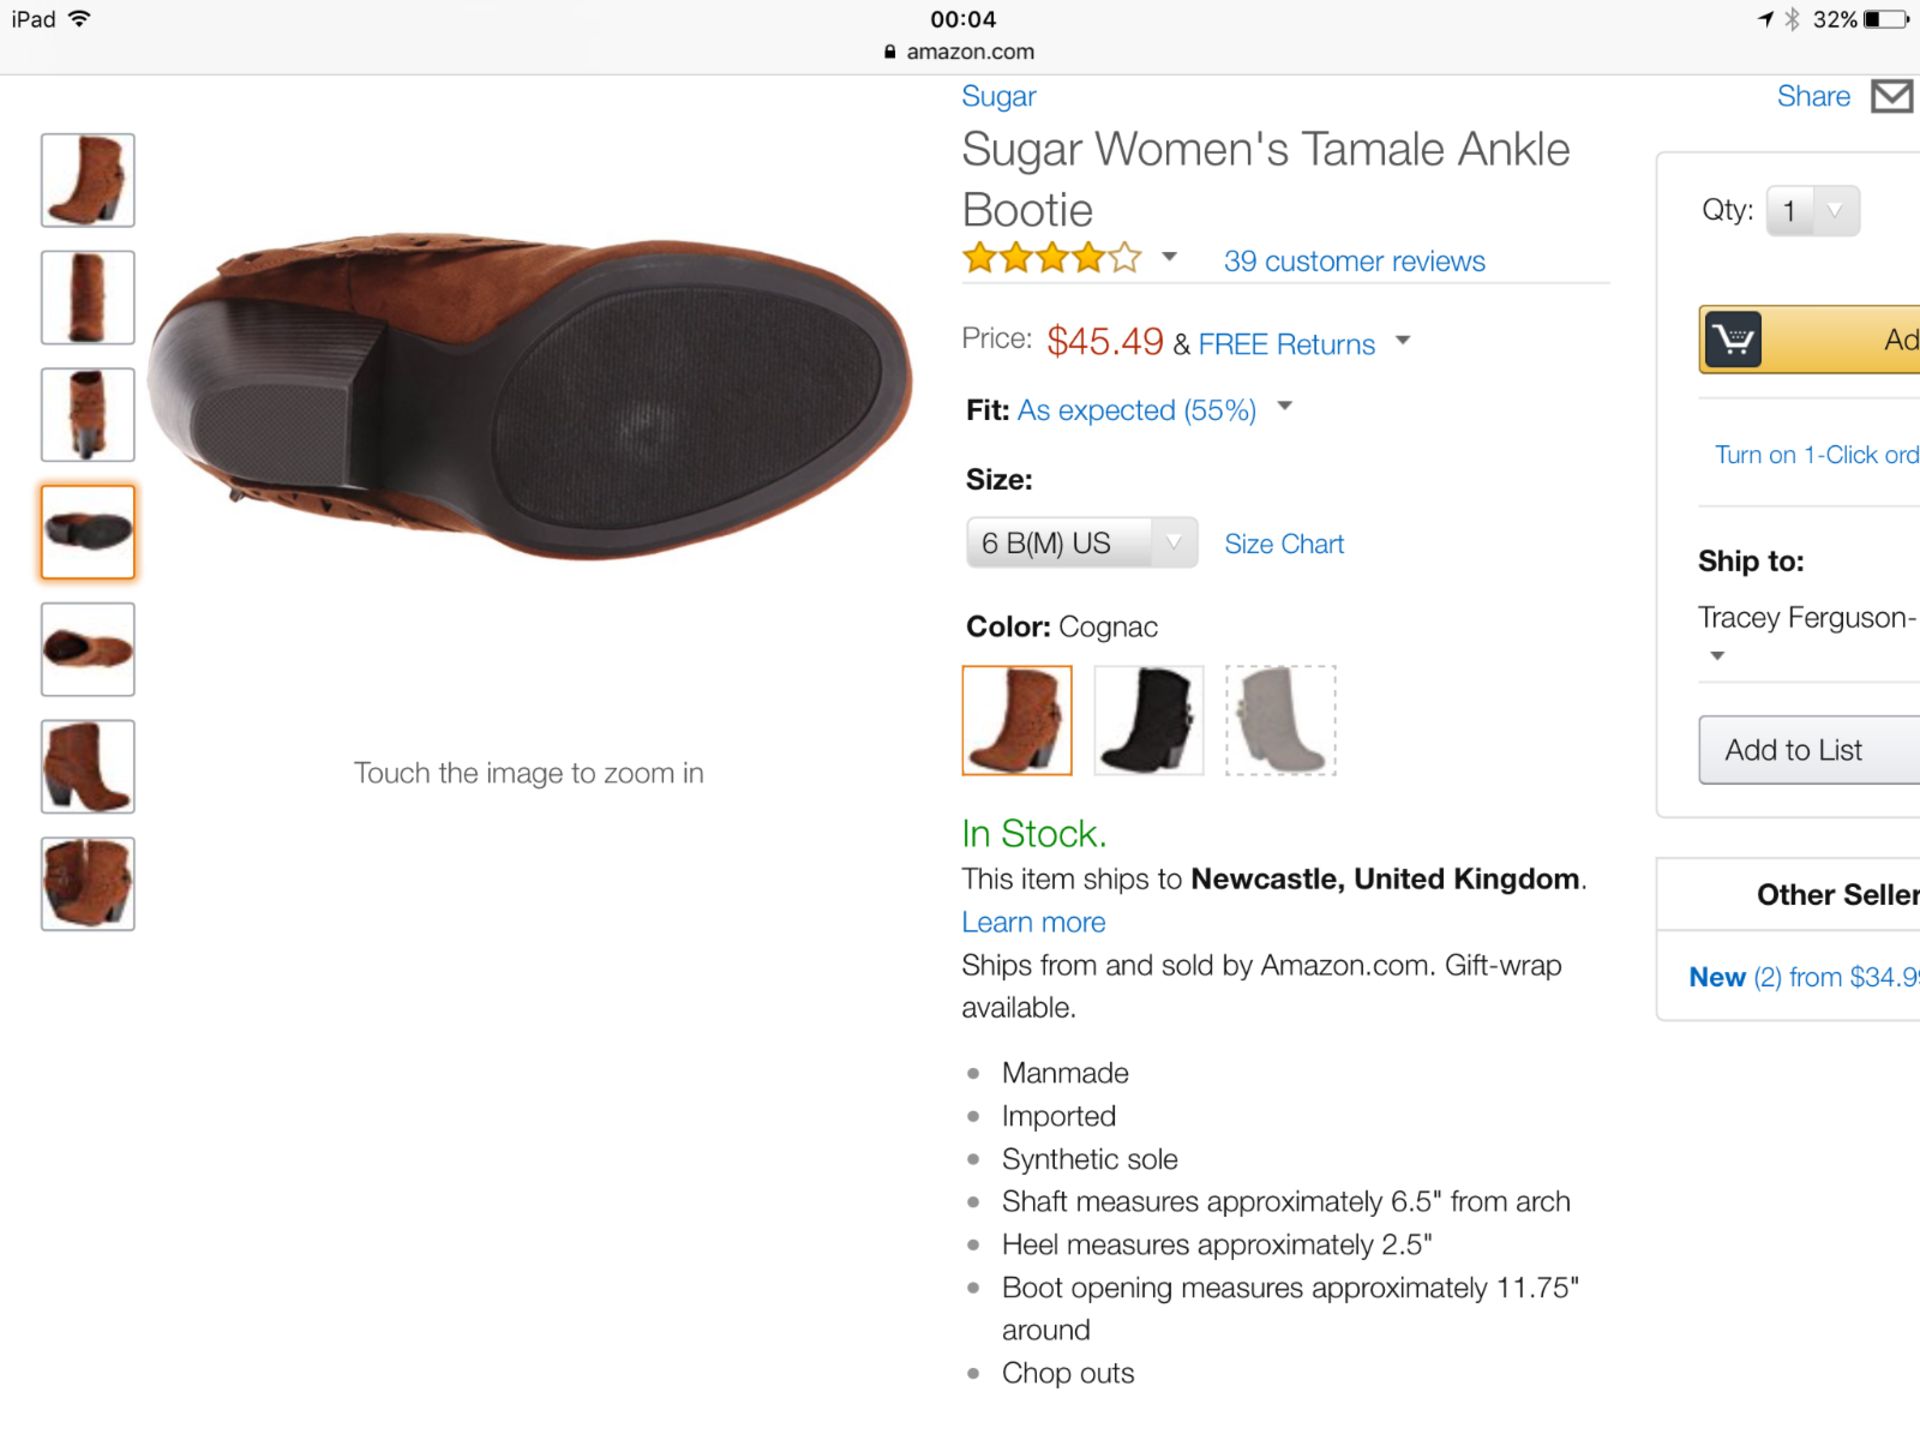 Sugar Women's Tamale Ankle Bootie, Size US Eur 36 UK 4 (New with box) [Ref: B-002] - Image 4 of 8